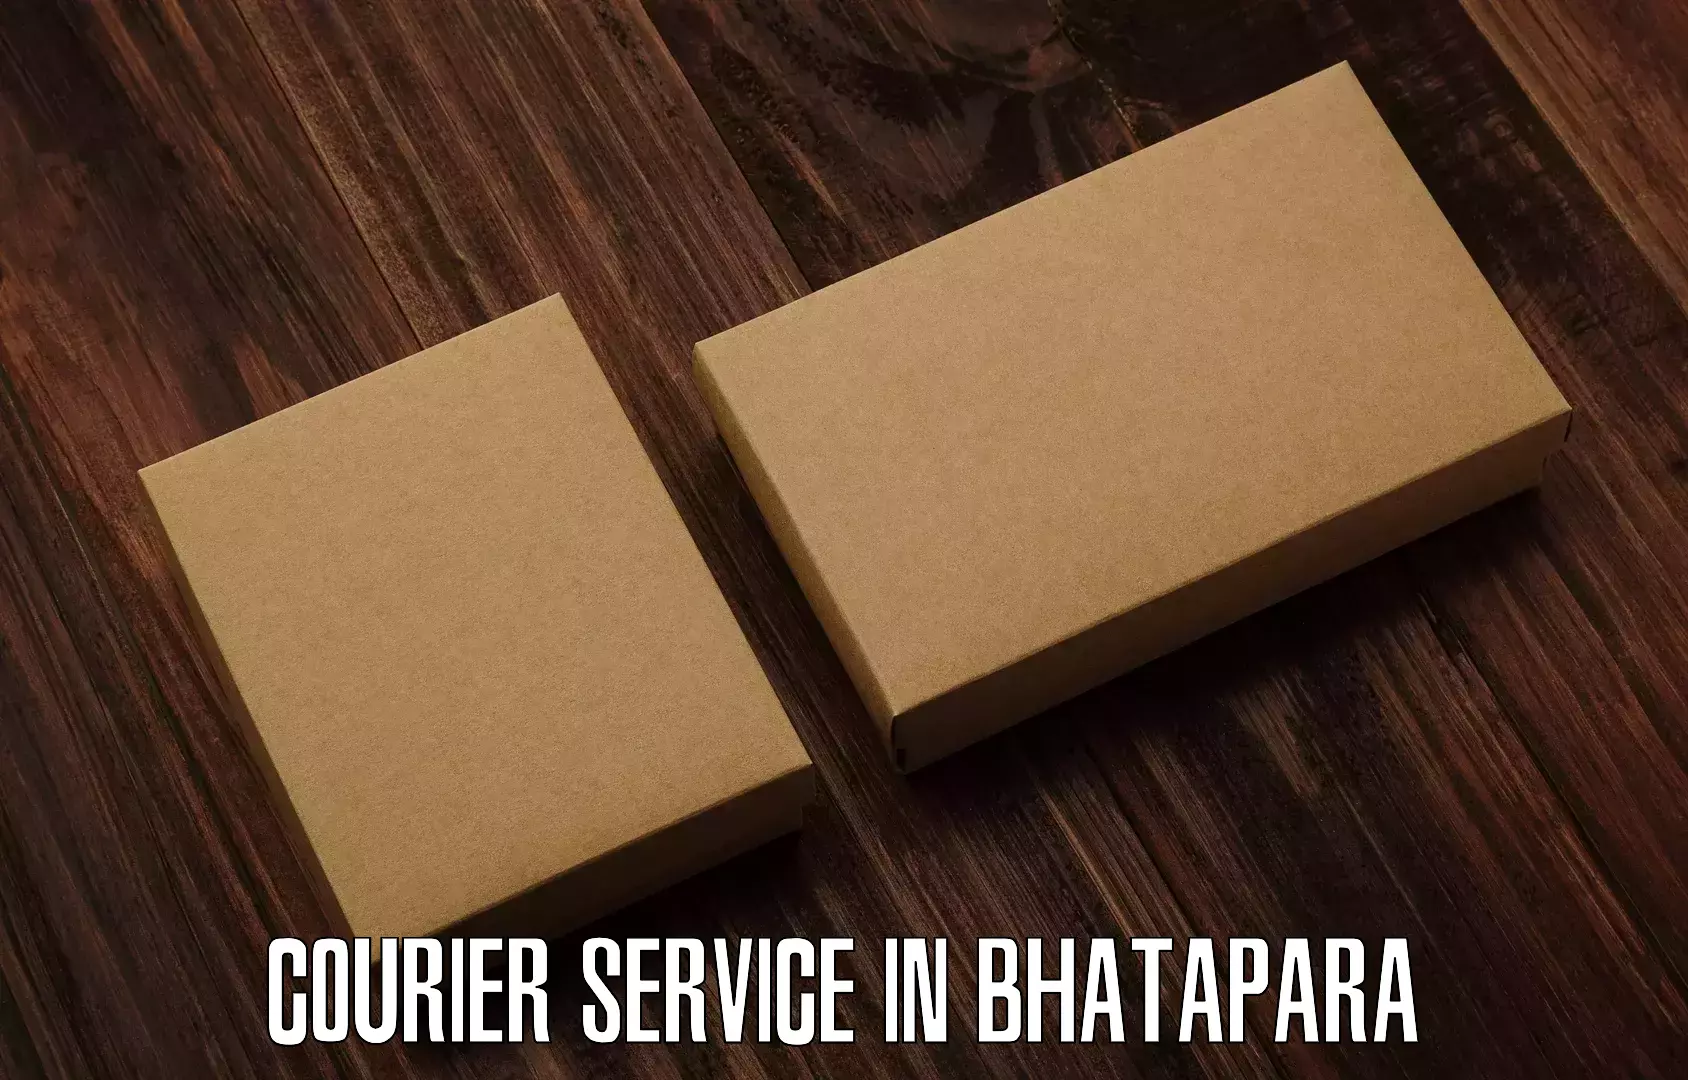 Scheduled delivery in Bhatapara